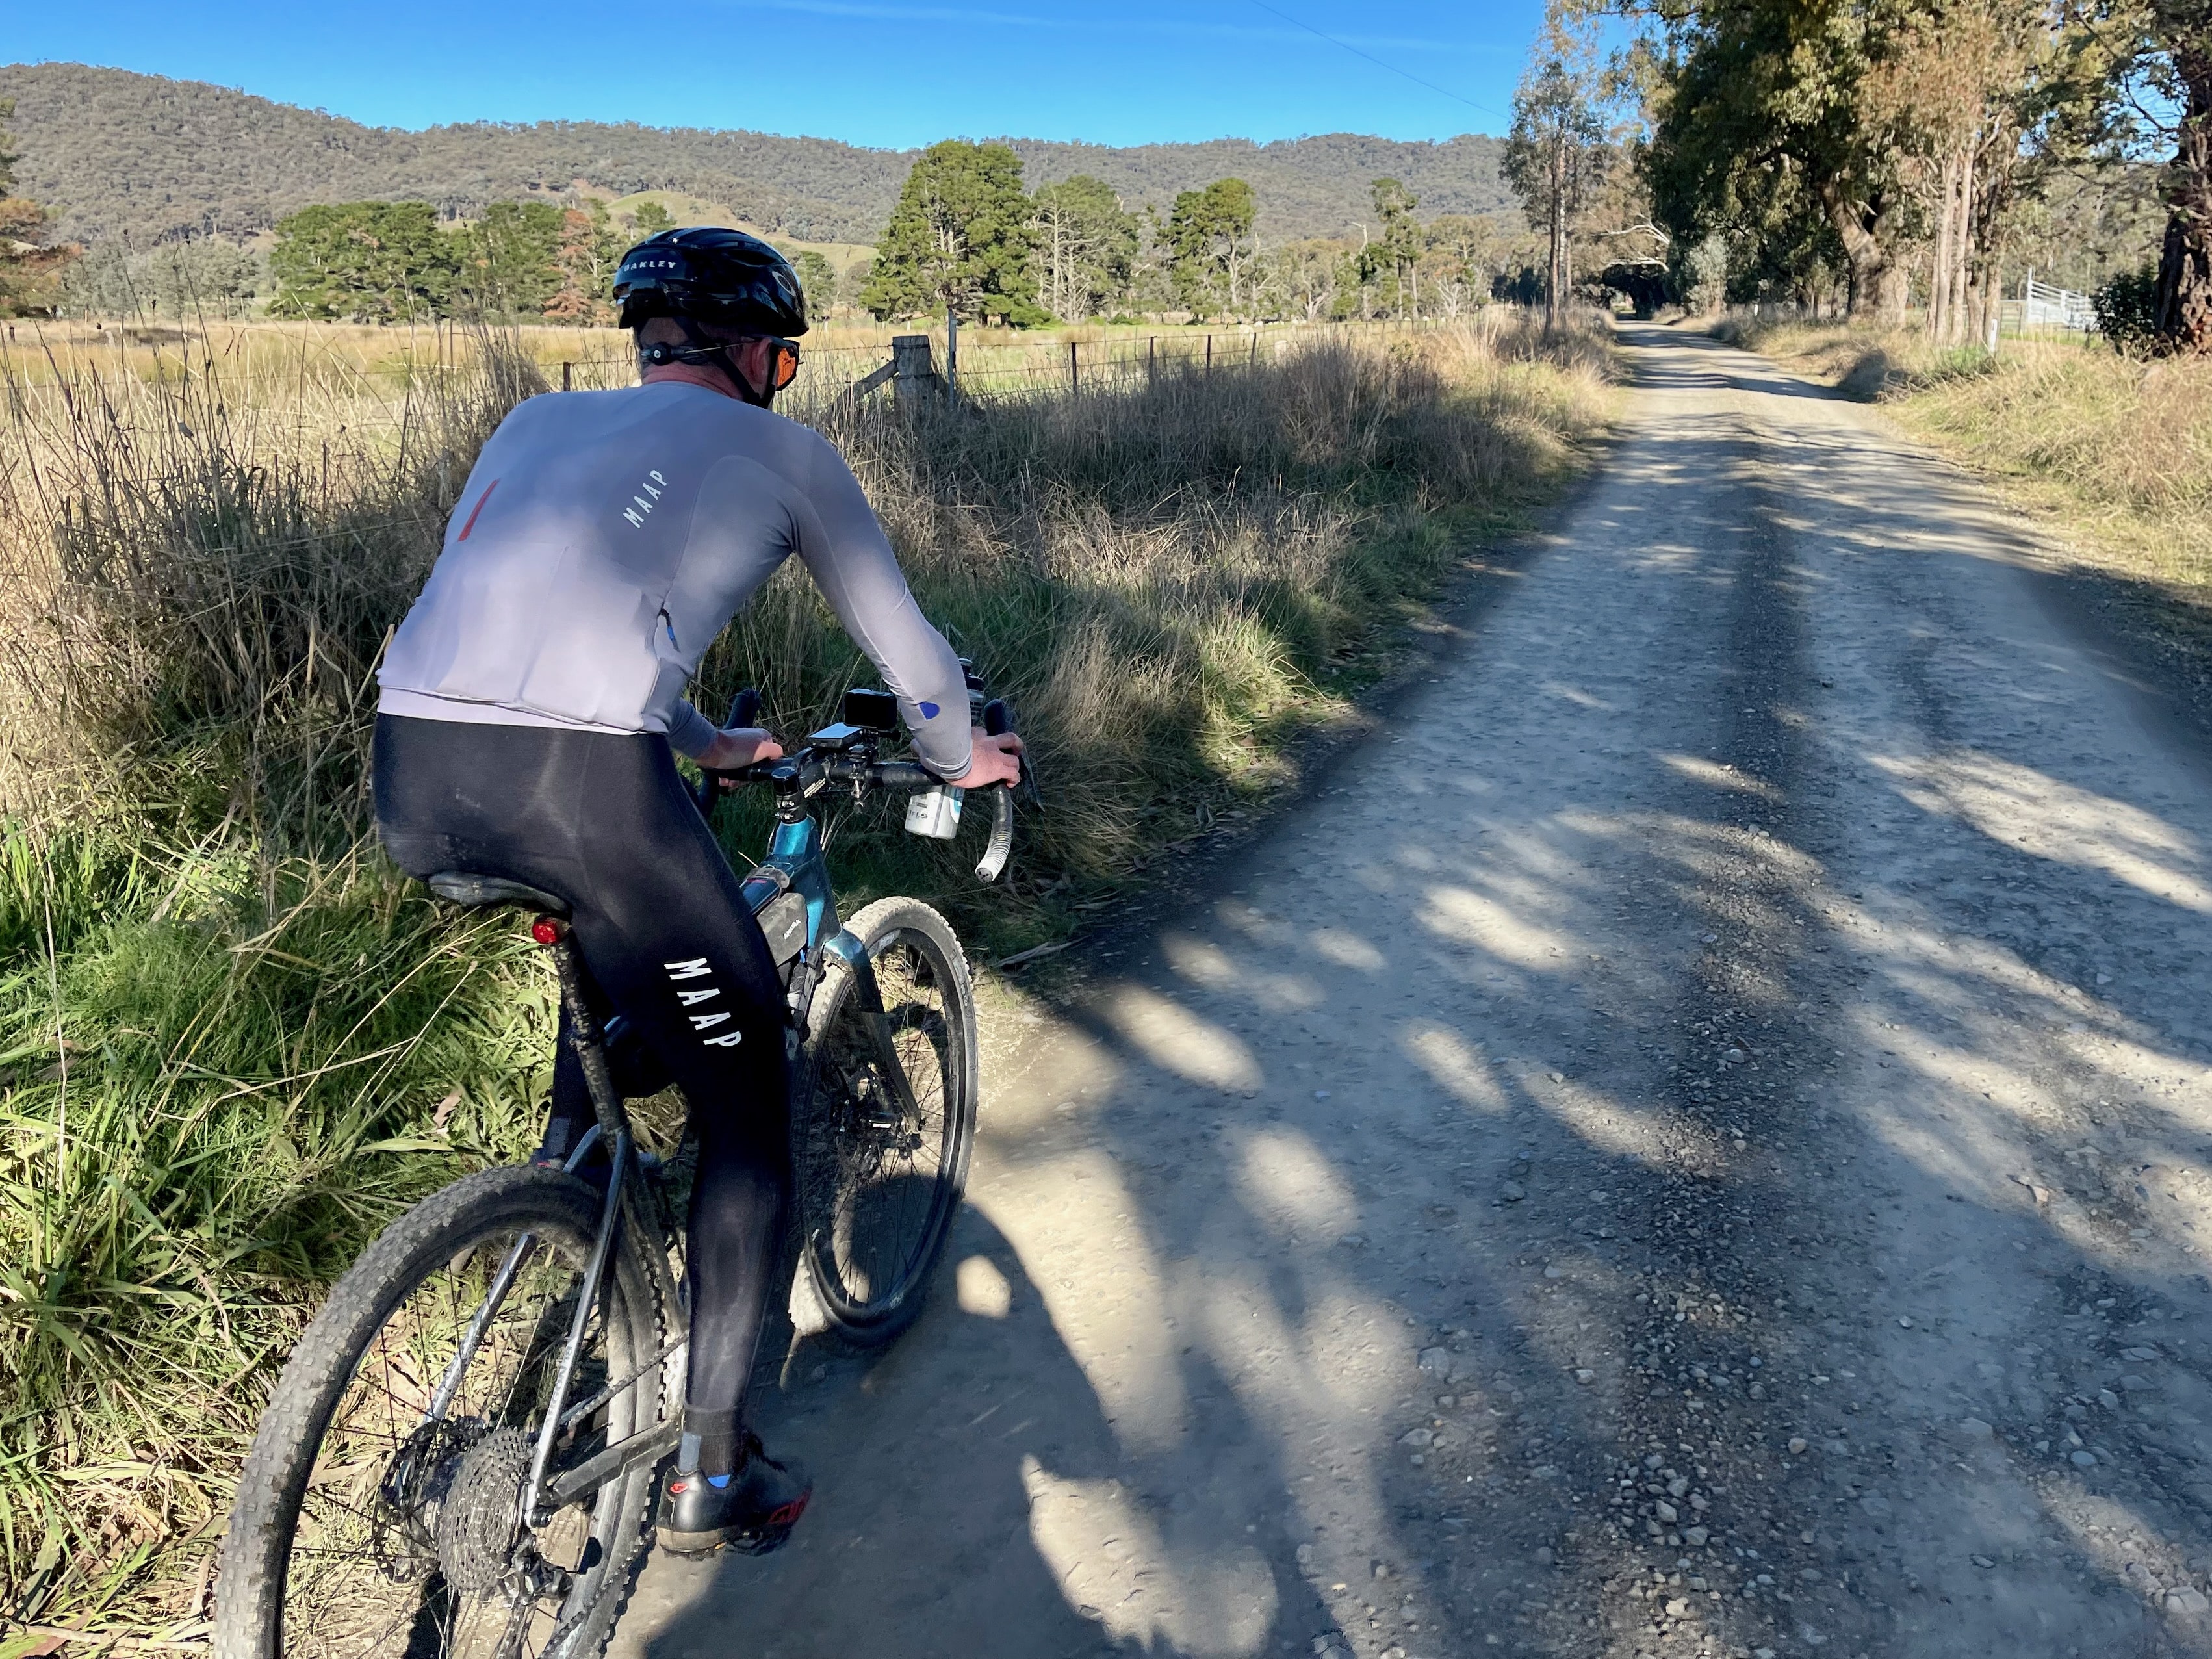 A cyclist riding on a gravel road with open farmland and native bushland in the background on a sunny day